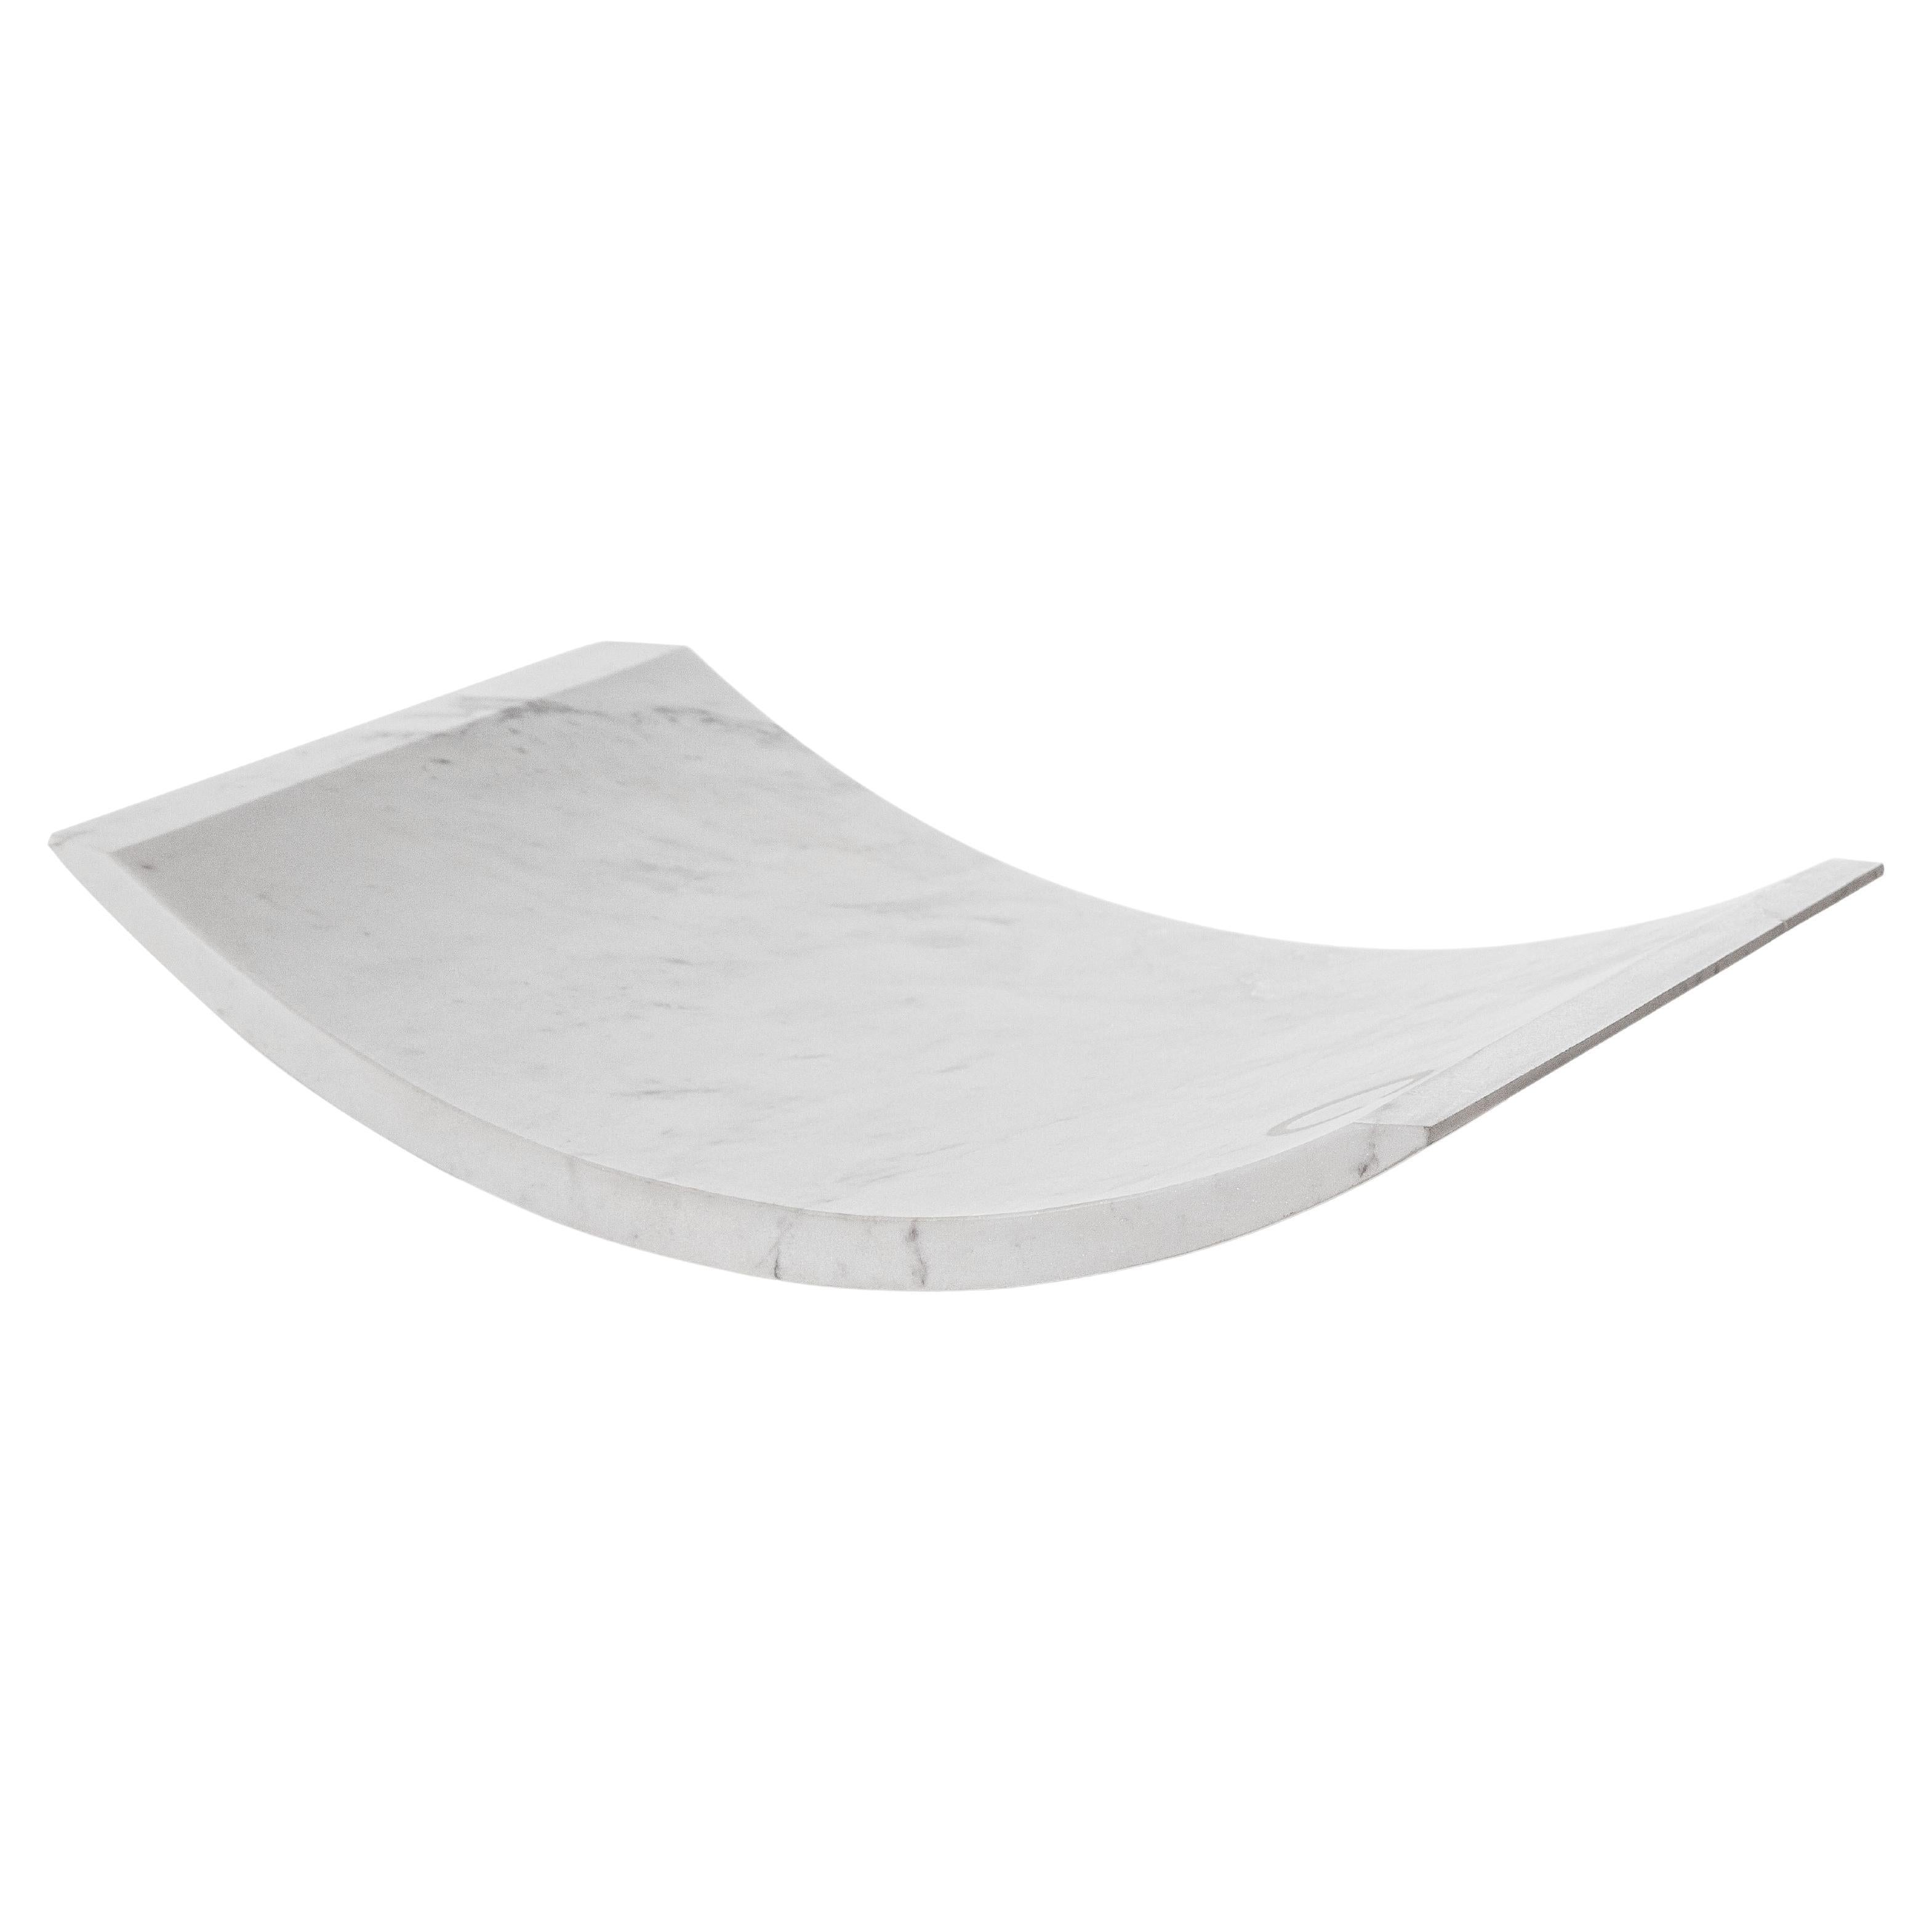 Hammock Marble Platter by On.Entropy in White, Desk Accessory of Platter